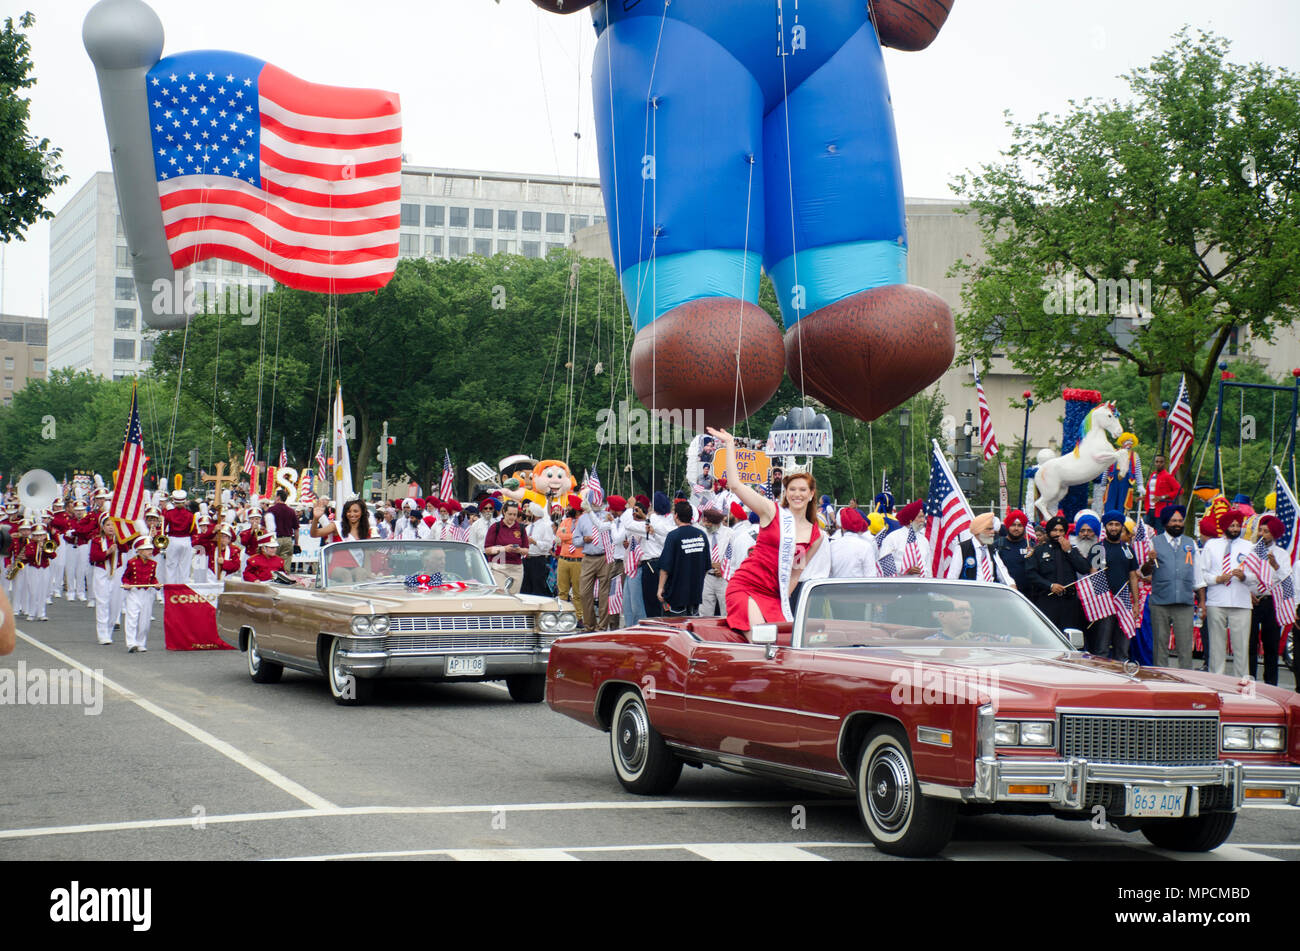 Beauty queens and vintage convertibles at the annual 4th of July parade, Washington, DC. Stock Photo